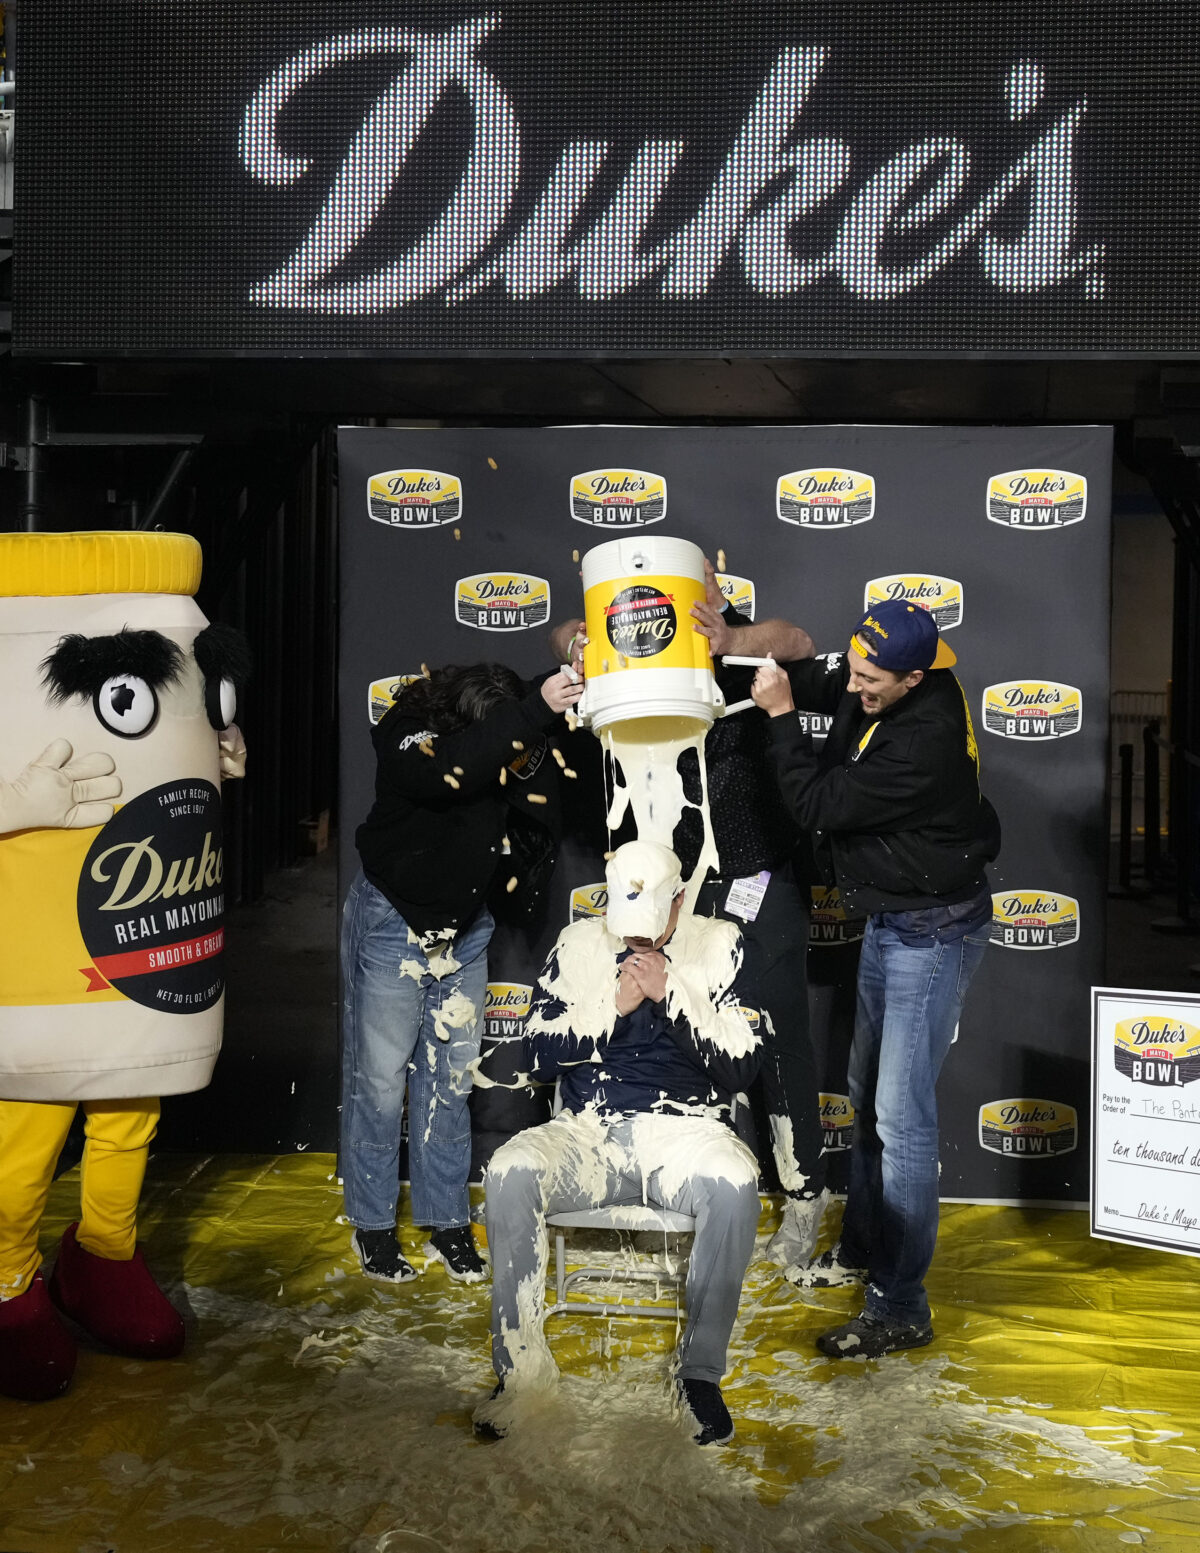 West Virginia coach Neal Brown gets doused with Duke’s Mayo after bowl win